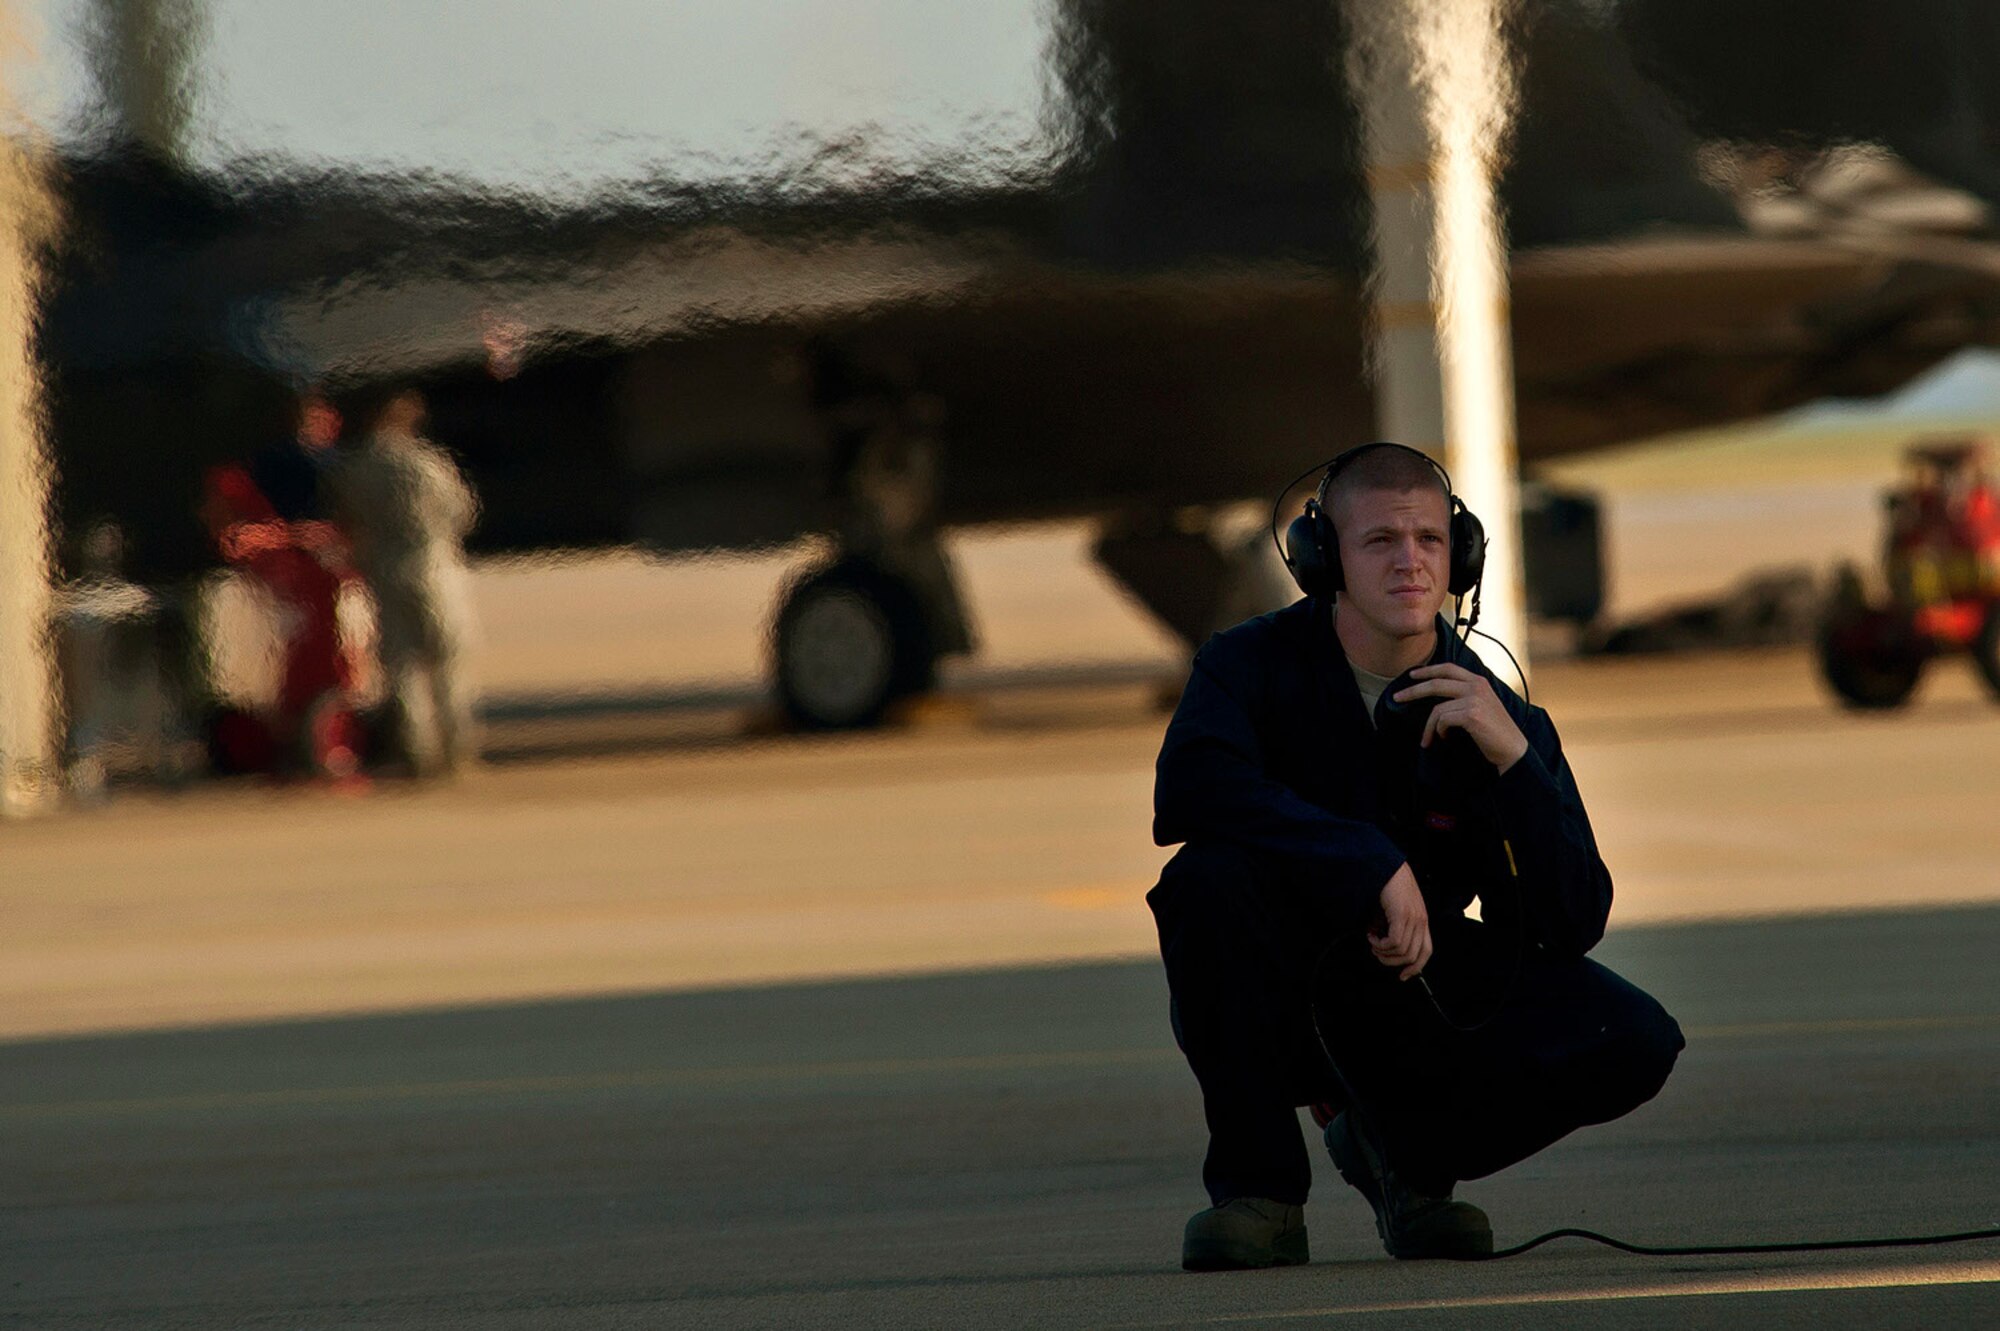 Airman 1st Class Benjamin Speer, an F-22 crew chief, watches over an aircraft and communicates with a pilot during a preflight inspection before a training mission. (U.S. Air Force photo/Tech. Sgt. Bennie J. Davis III)